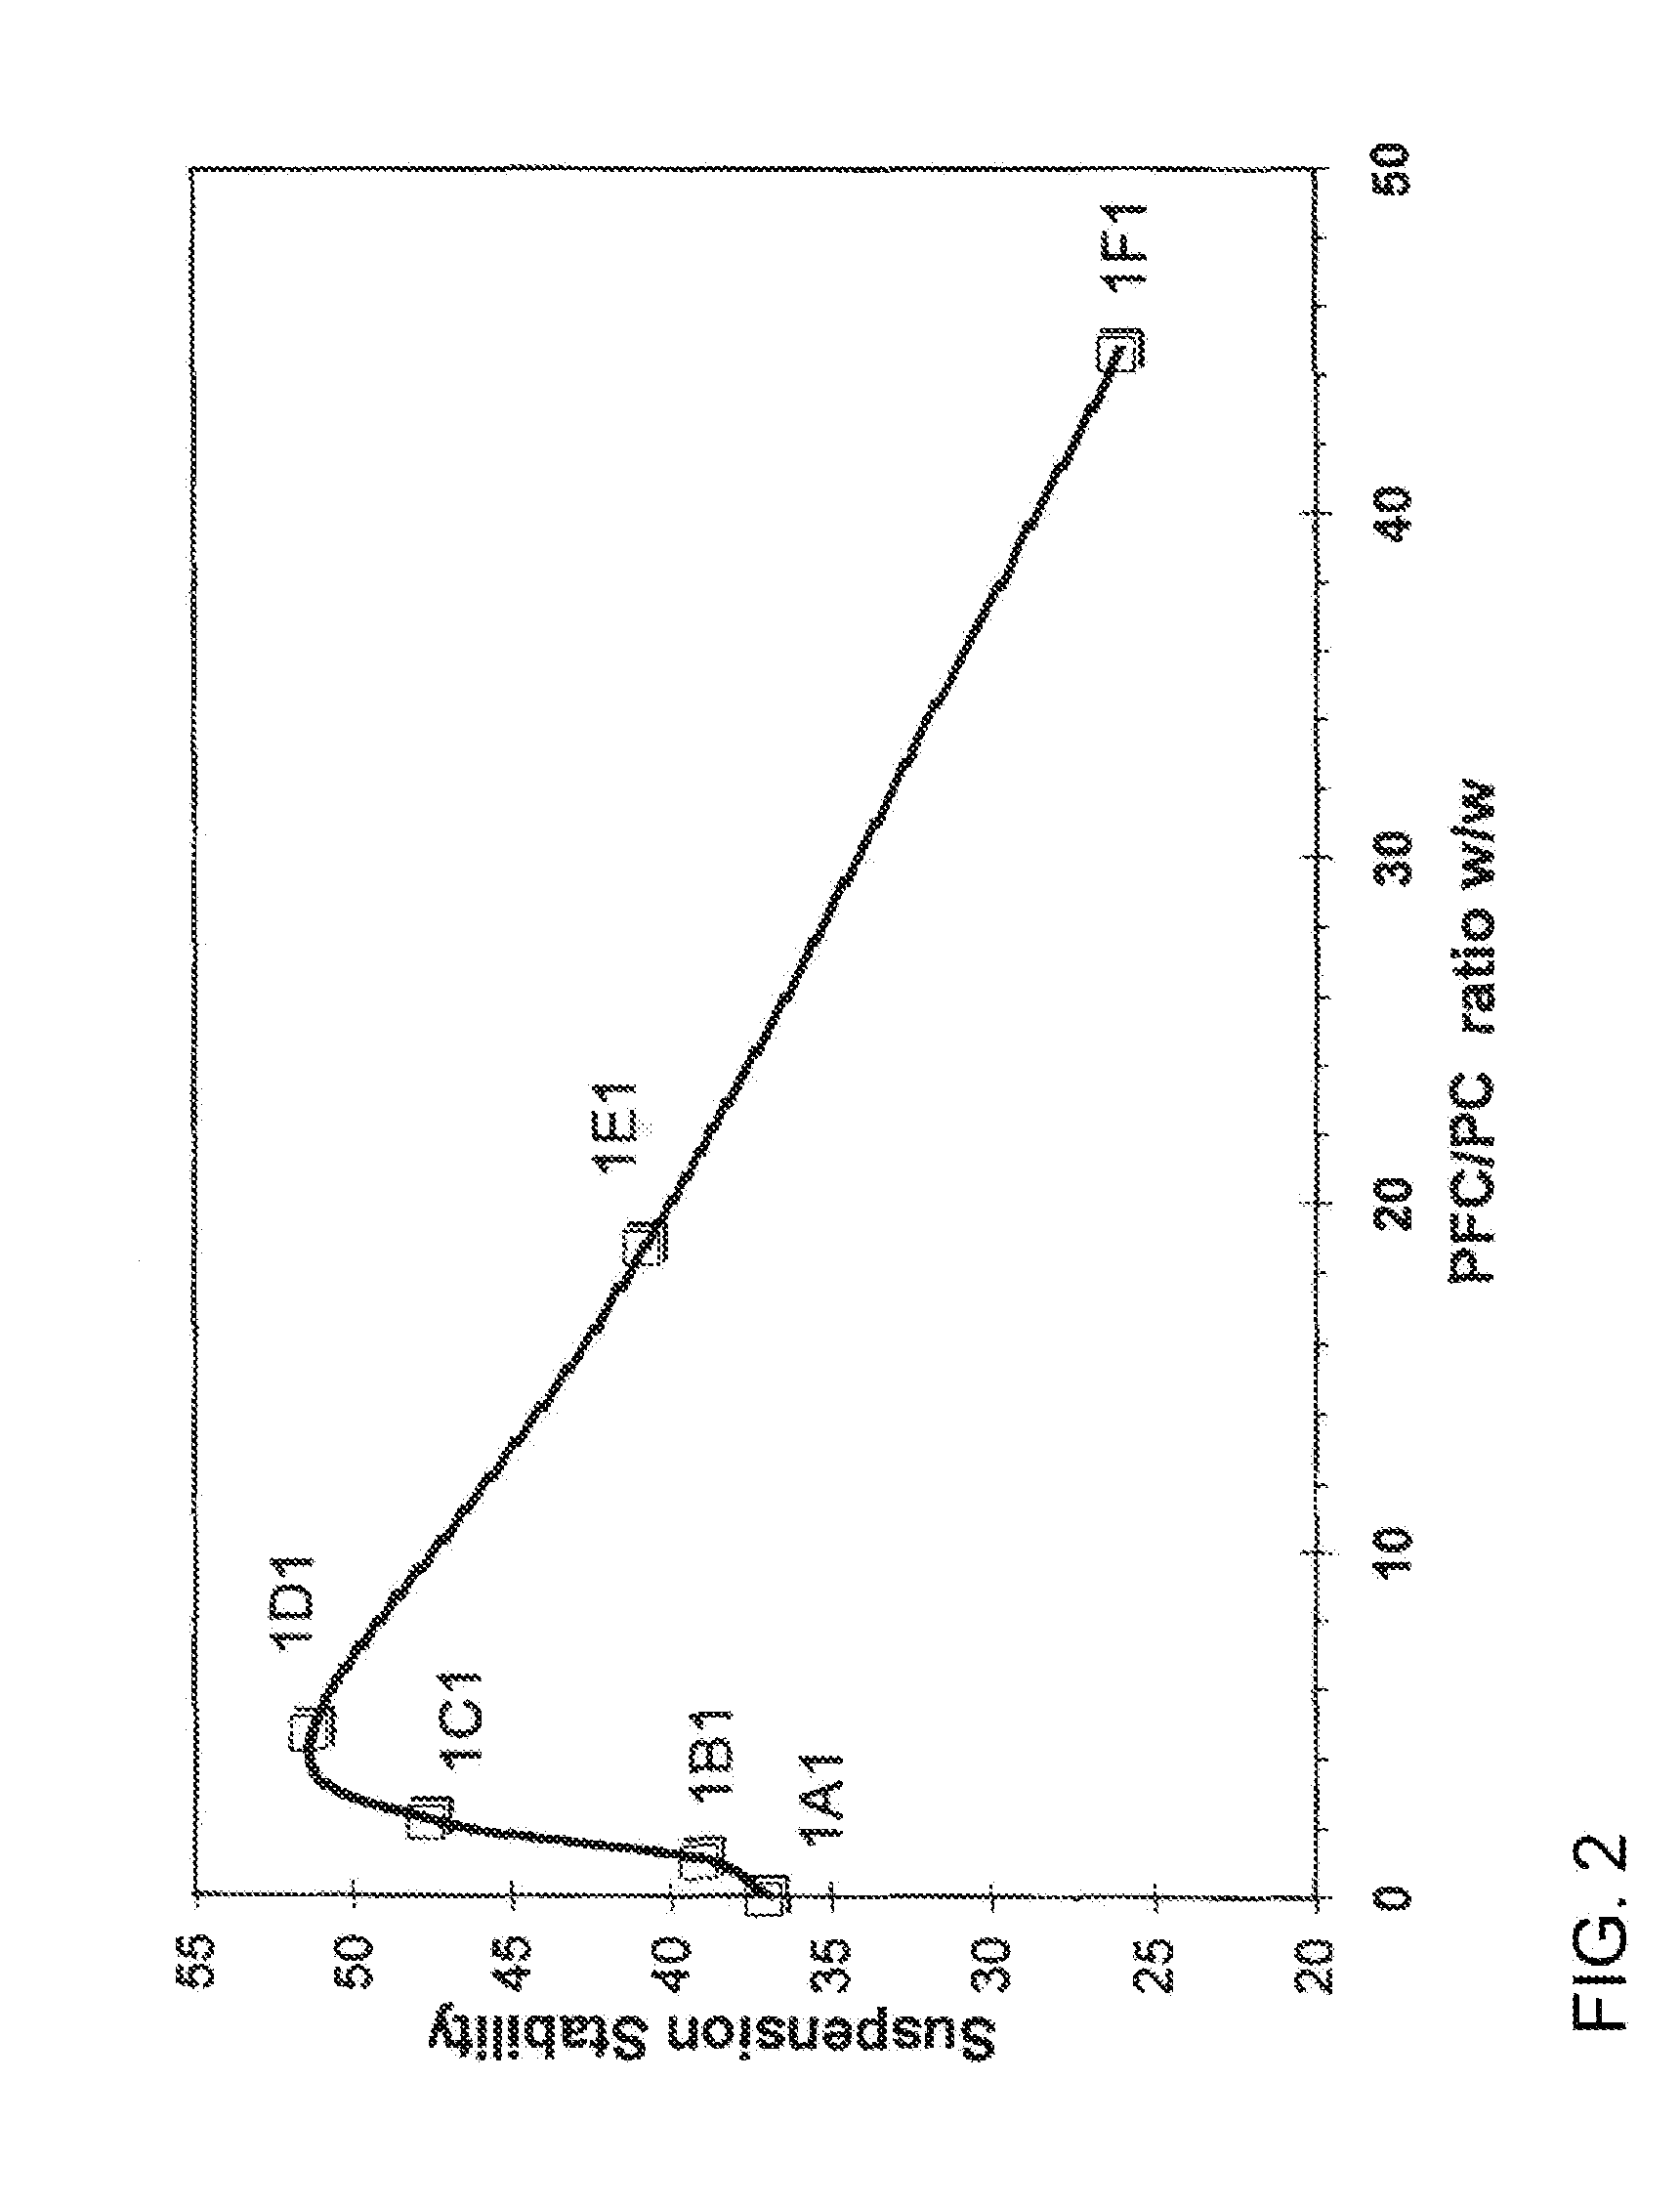 Engineered particles and methods of use